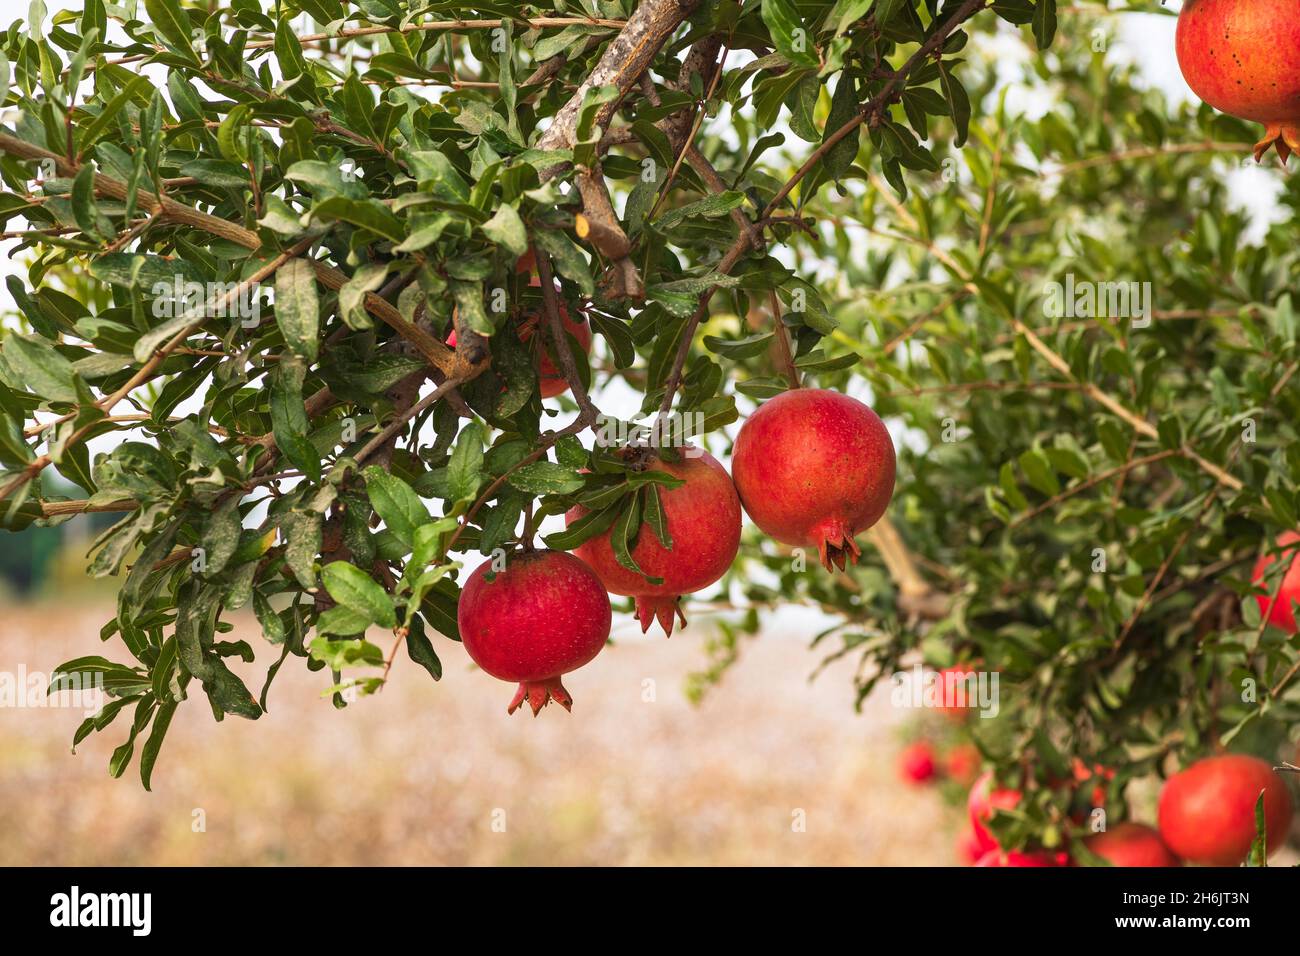 Ripe fruits of pomegranate tree closeup hanging on branches. Israel Stock Photo